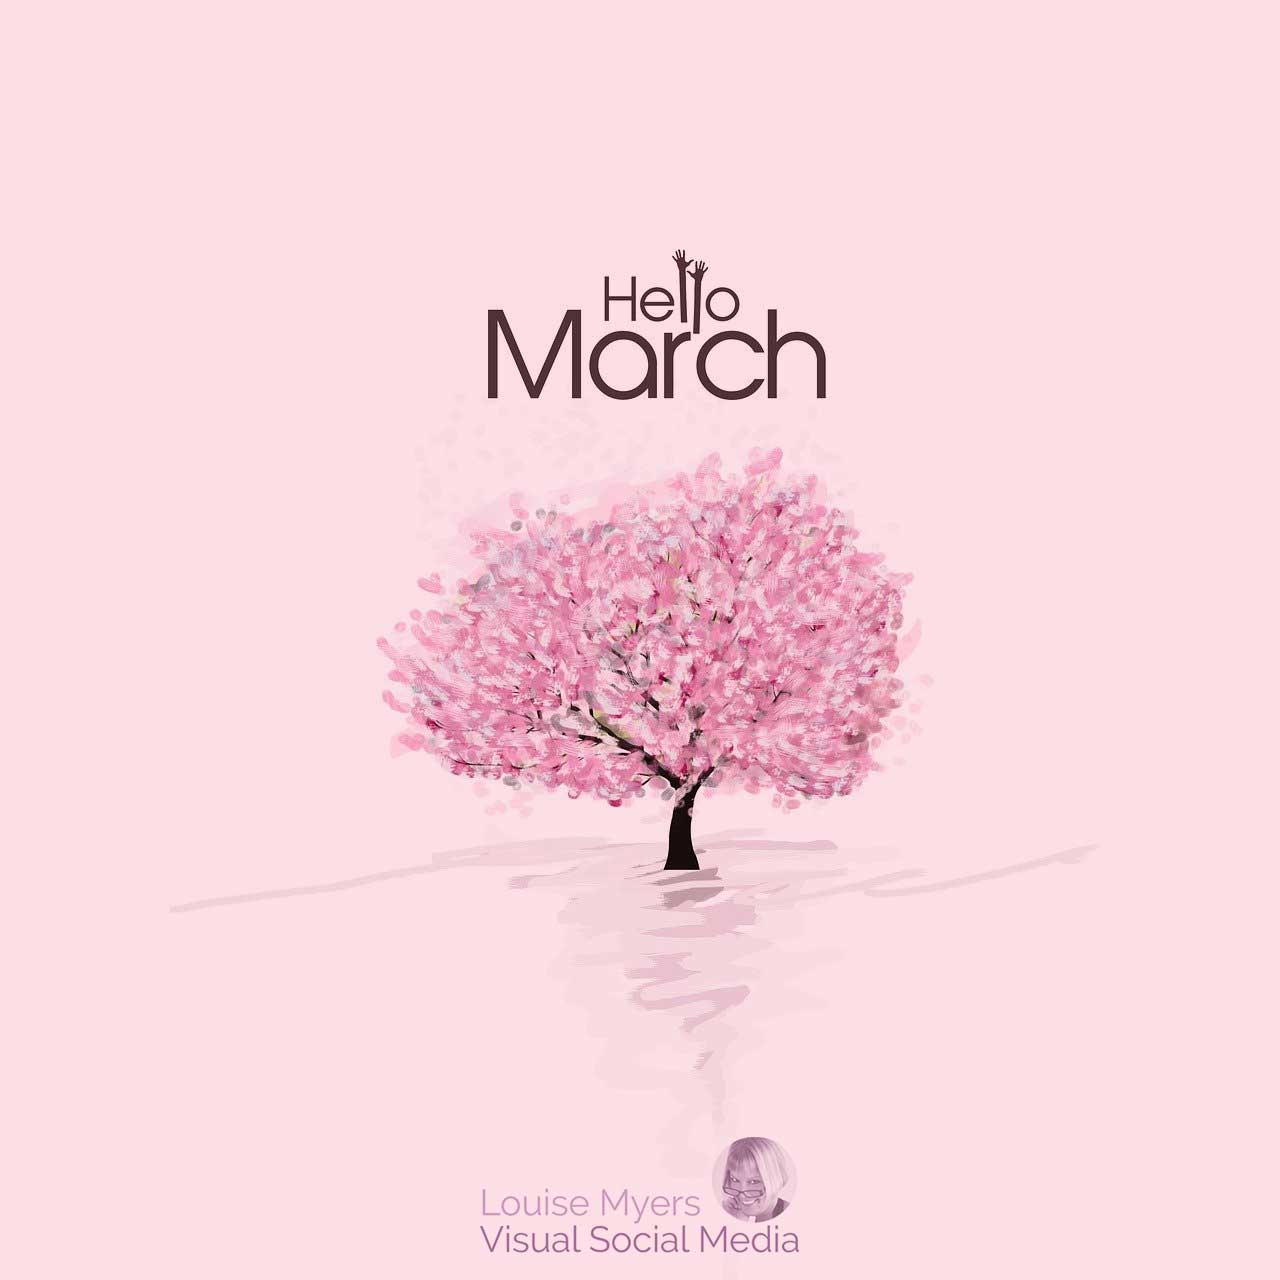 Hello March on pink flowering cherry tree.